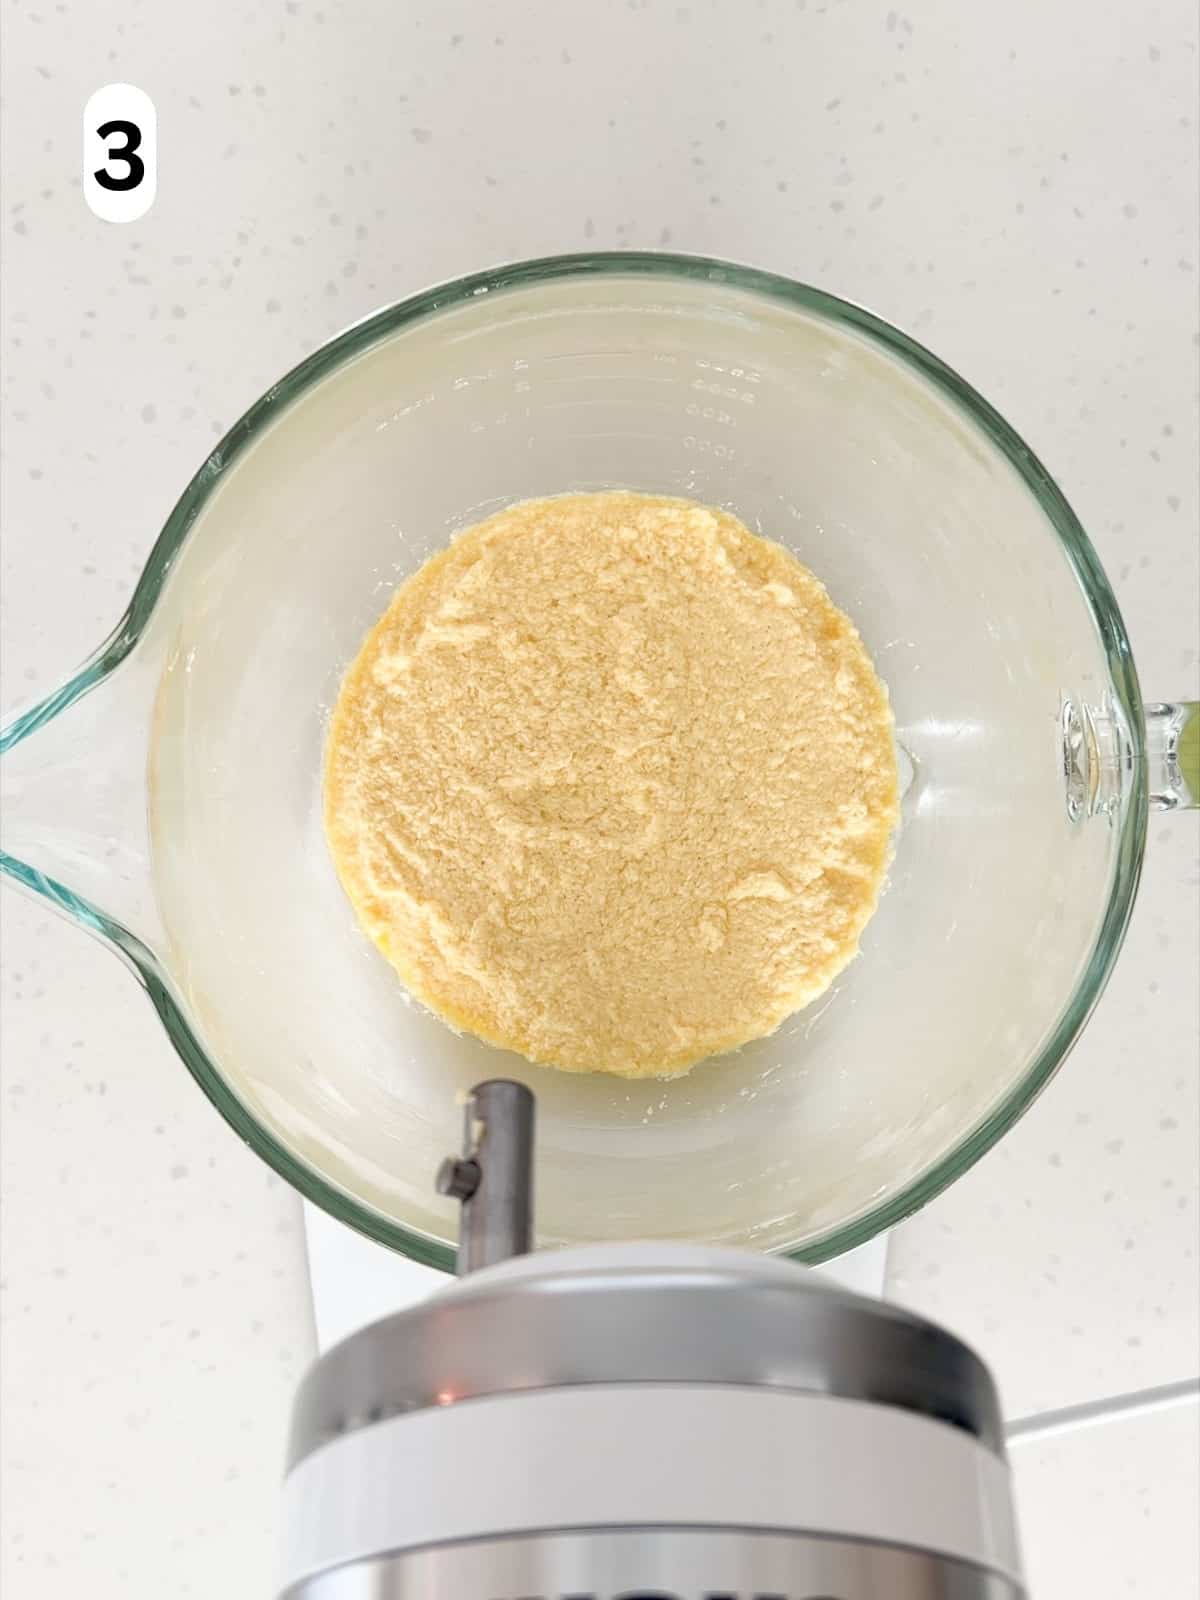 Butter, sugar, eggs, almond extract, and vanilla extract are mixed together until combined.